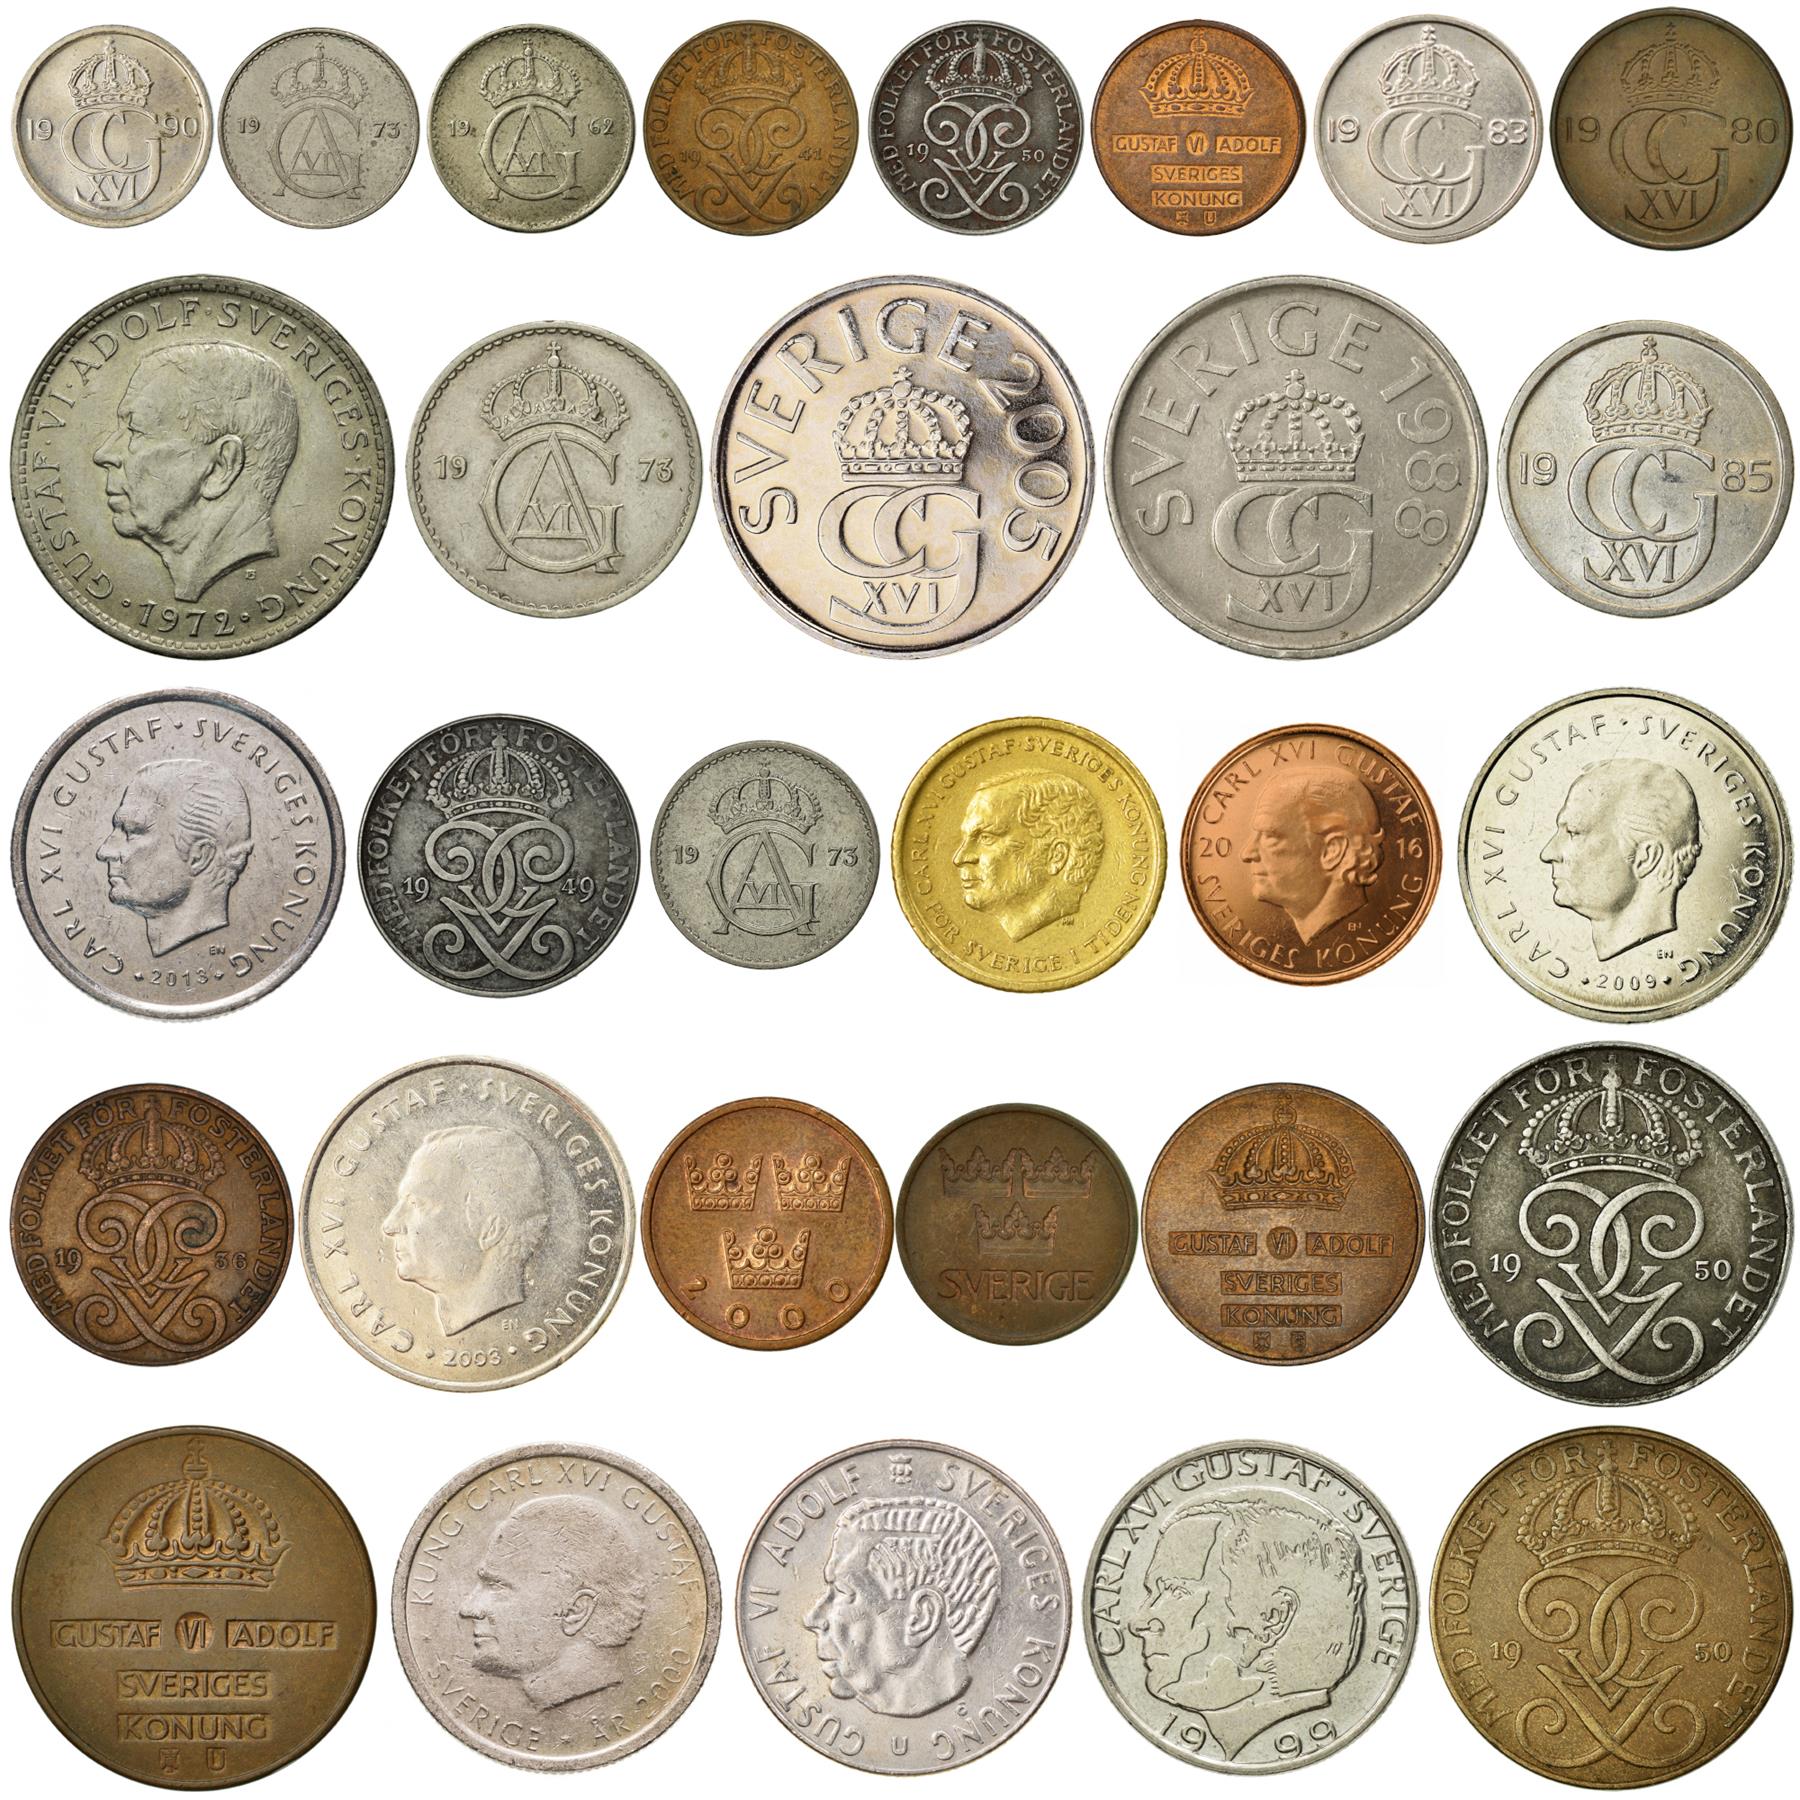 30 Sweden Coins | Swedish Currency Collection | 1 2 5 10 25 50 Ore 1 5